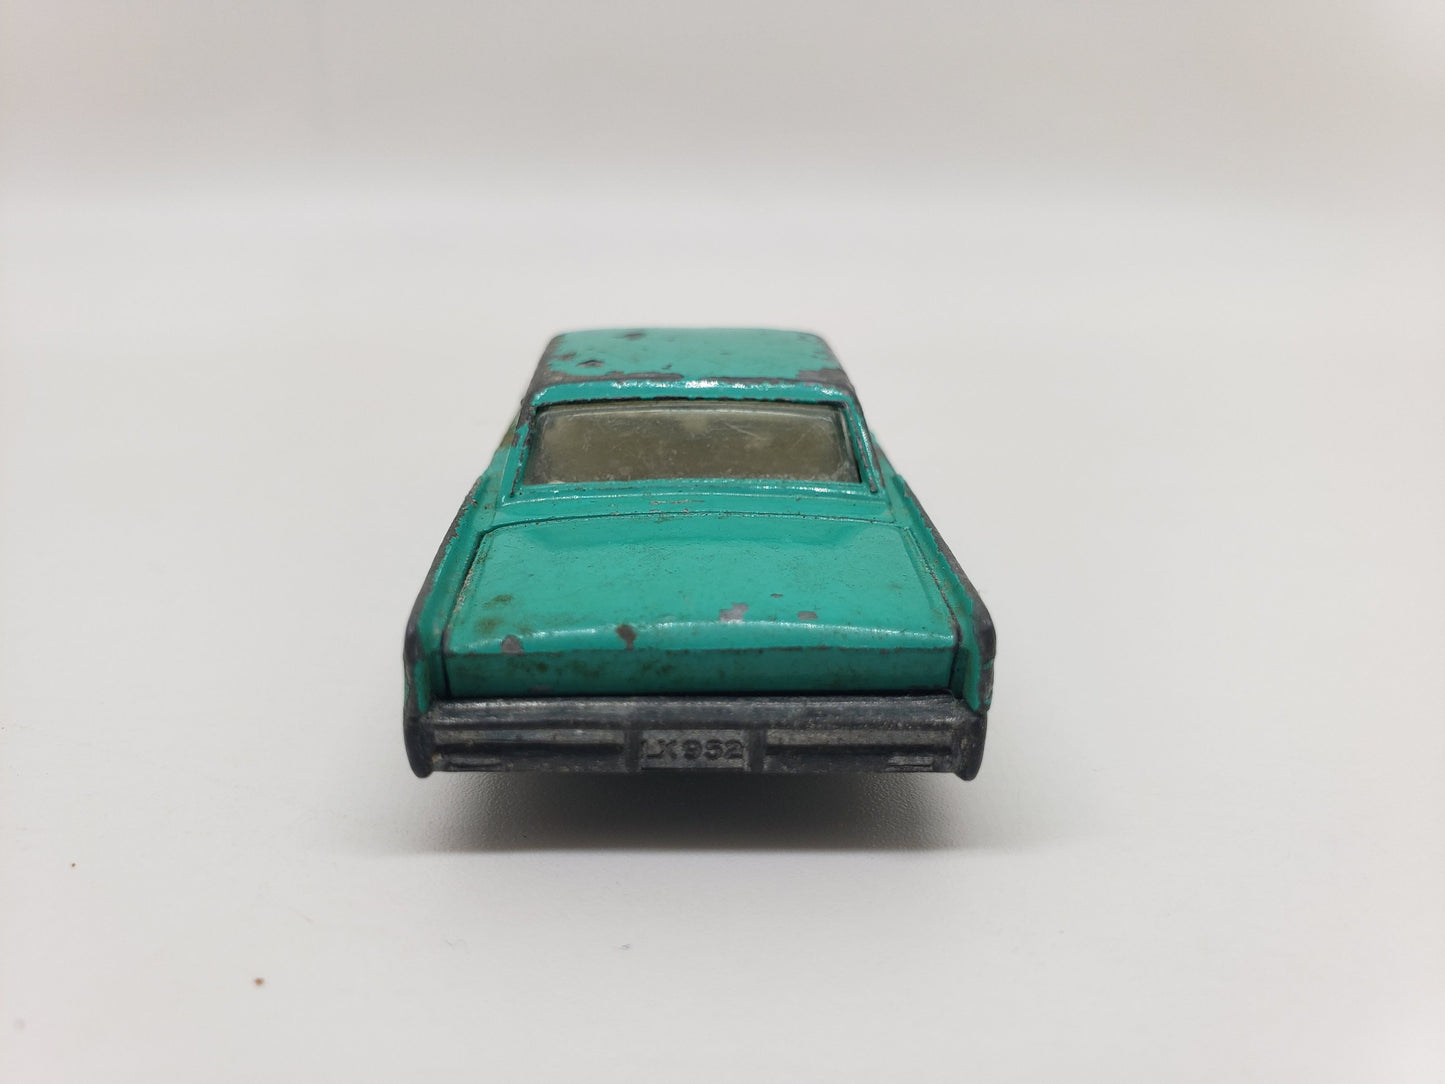 Matchbox 1967 Lincoln Continental Turquoise Vintage Lesney Collectable Scale Model Miniature Toy Car Perfect Birthday Gift